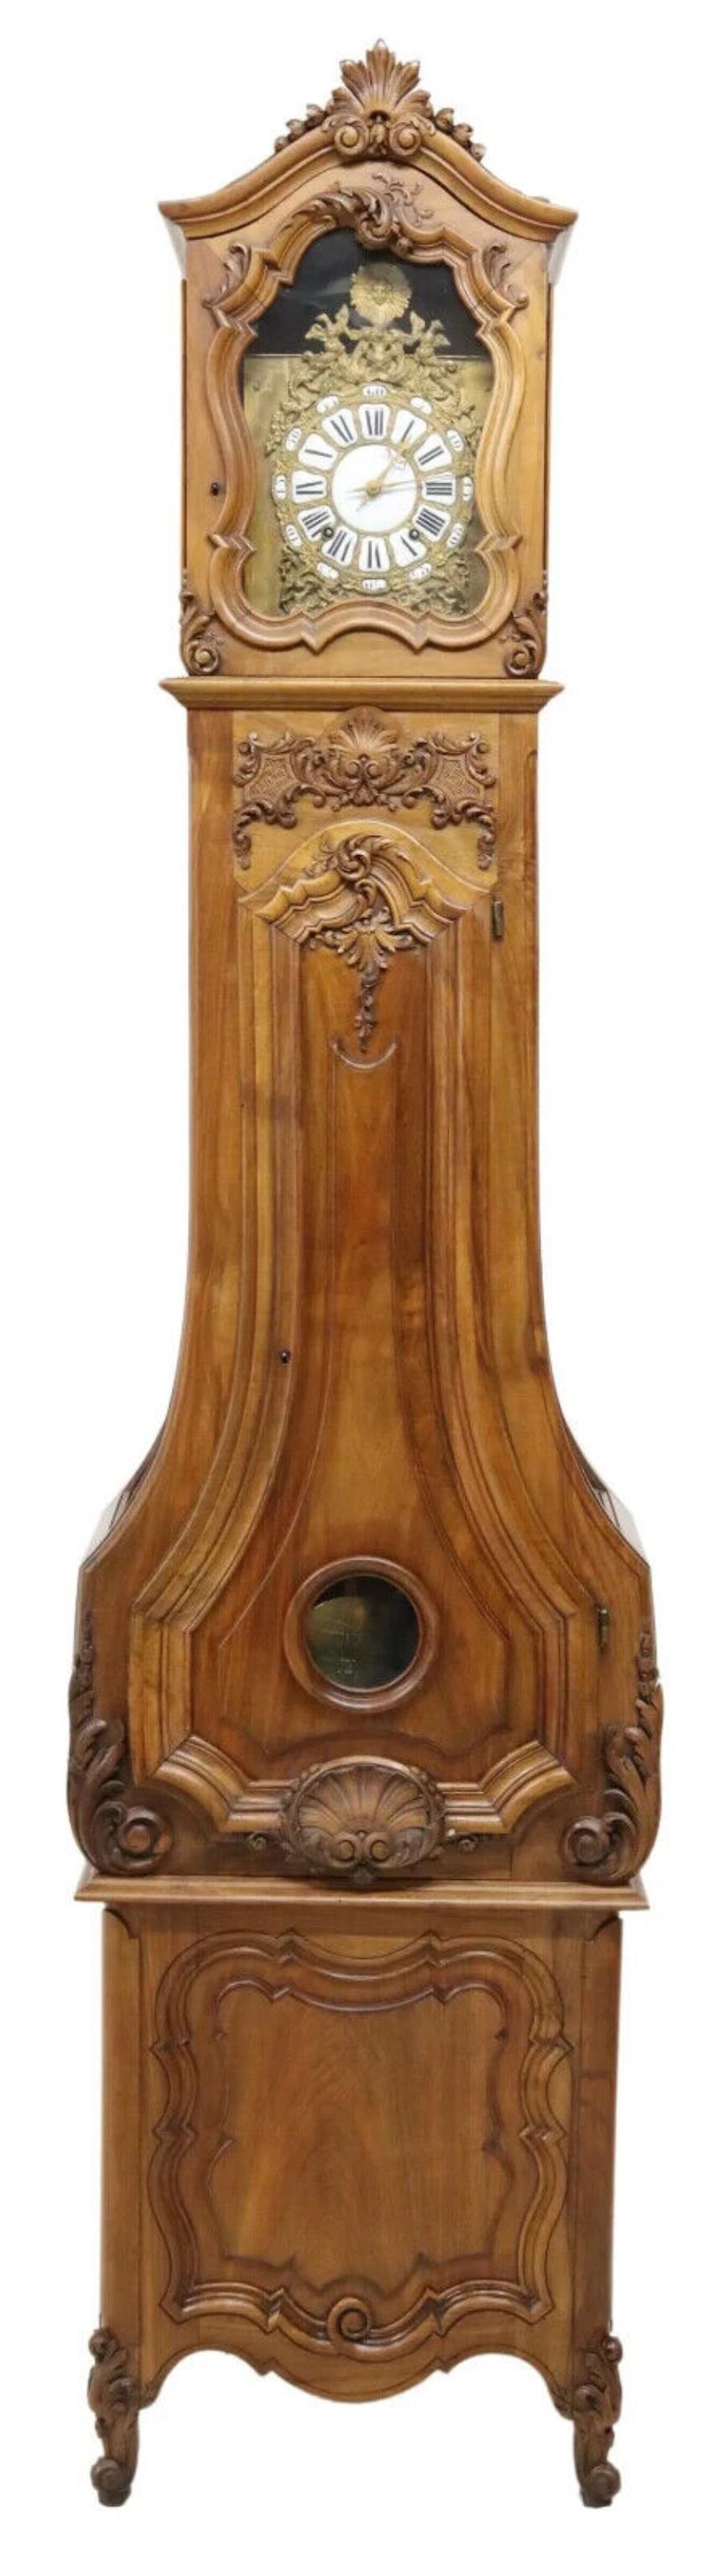 Gorgeous Antique Clock, Longcase, French,  Louis XV Style,  Walnut, Foliate, Gilt,  1889, 19th Century!

This exquisite antique longcase clock embodies the opulence of French design in the Louis XV style. Crafted in 1889 from rich walnut with